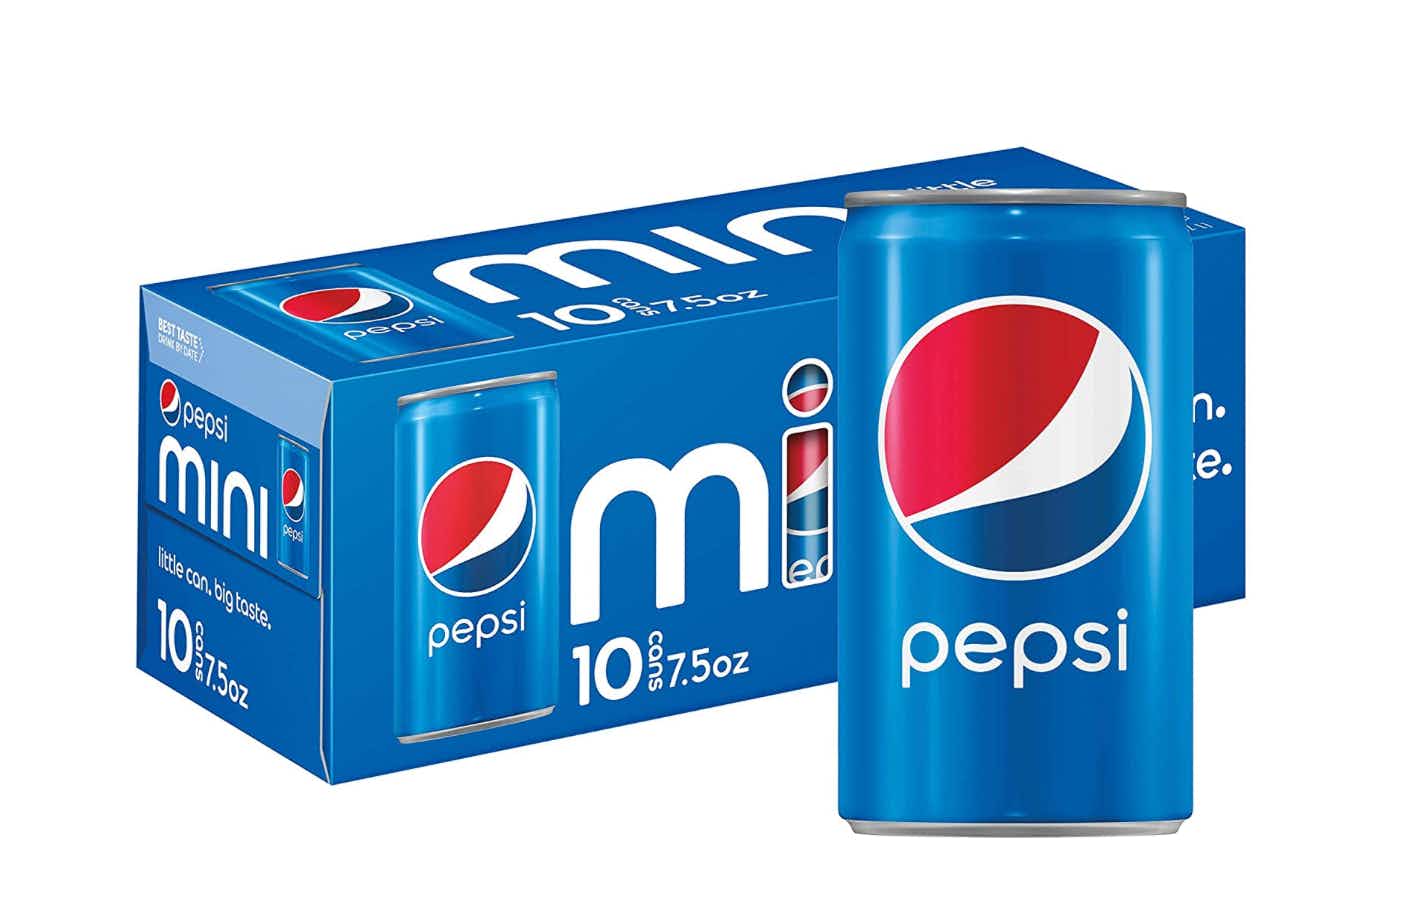 Pepsi mini can in a box and one in front